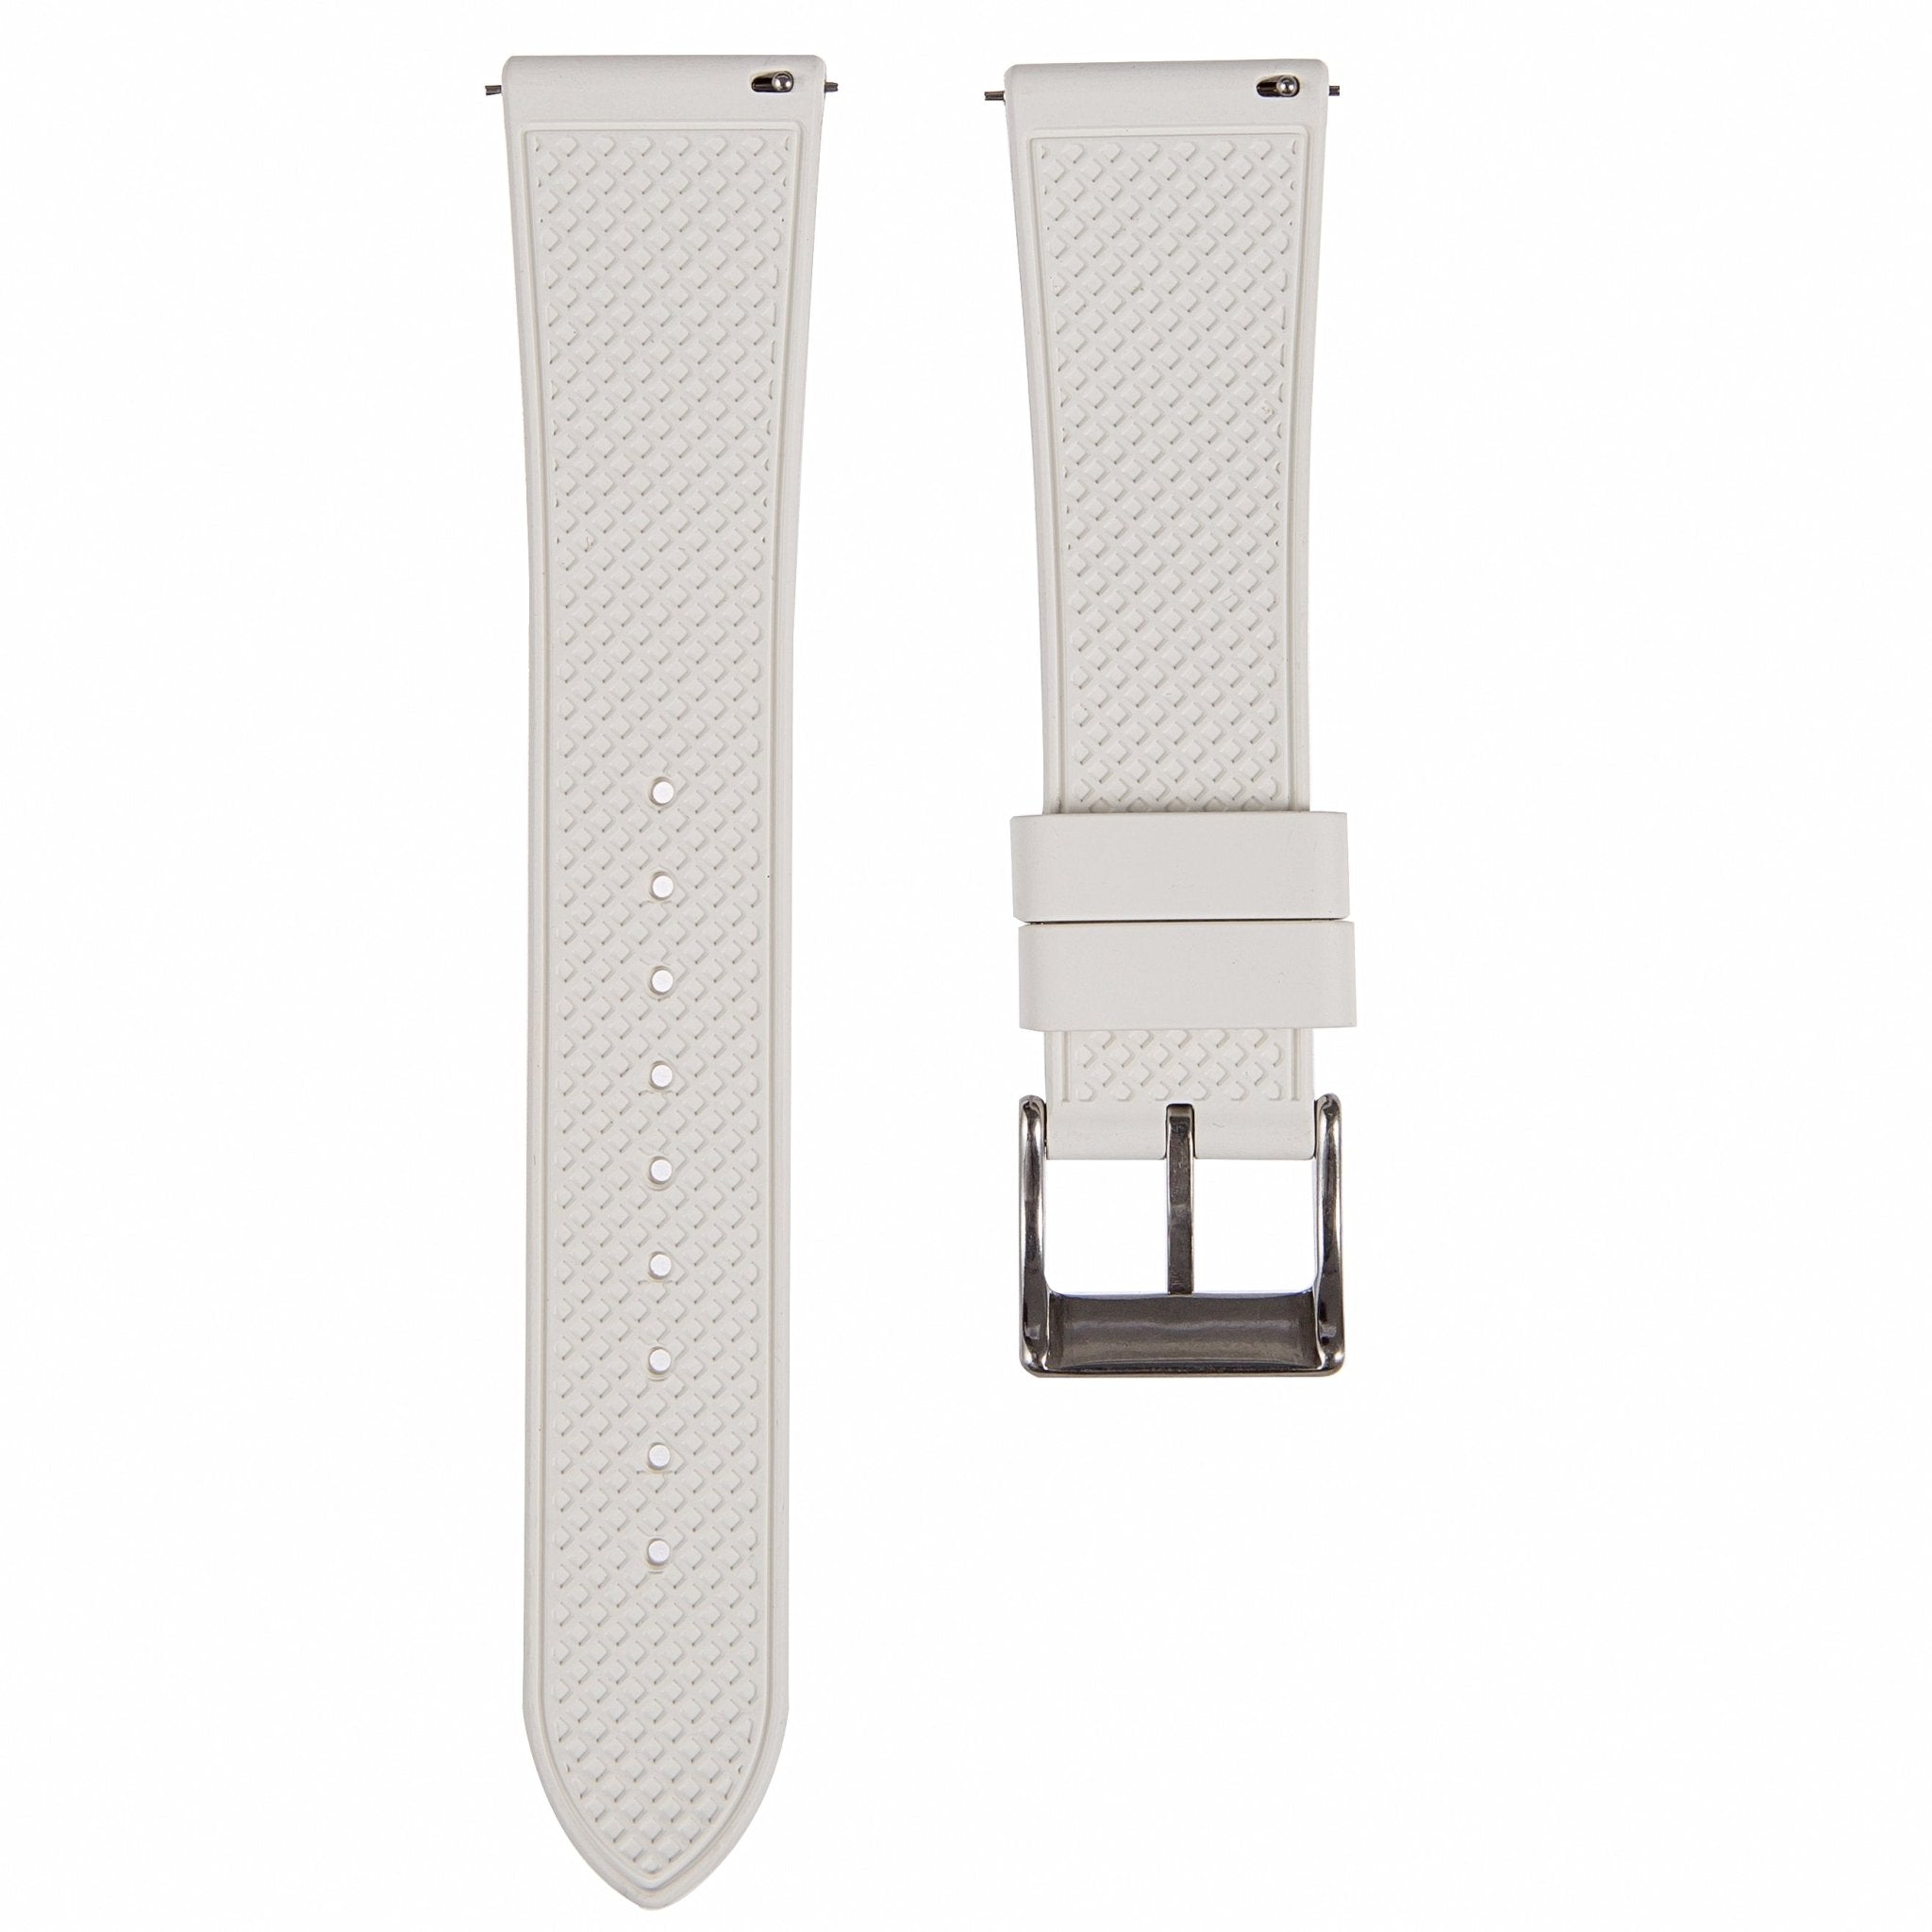 Grid FKM Rubber Strap - Quick-Release – Compatible with Blancpain x Swatch - White (2412) -StrapSeeker